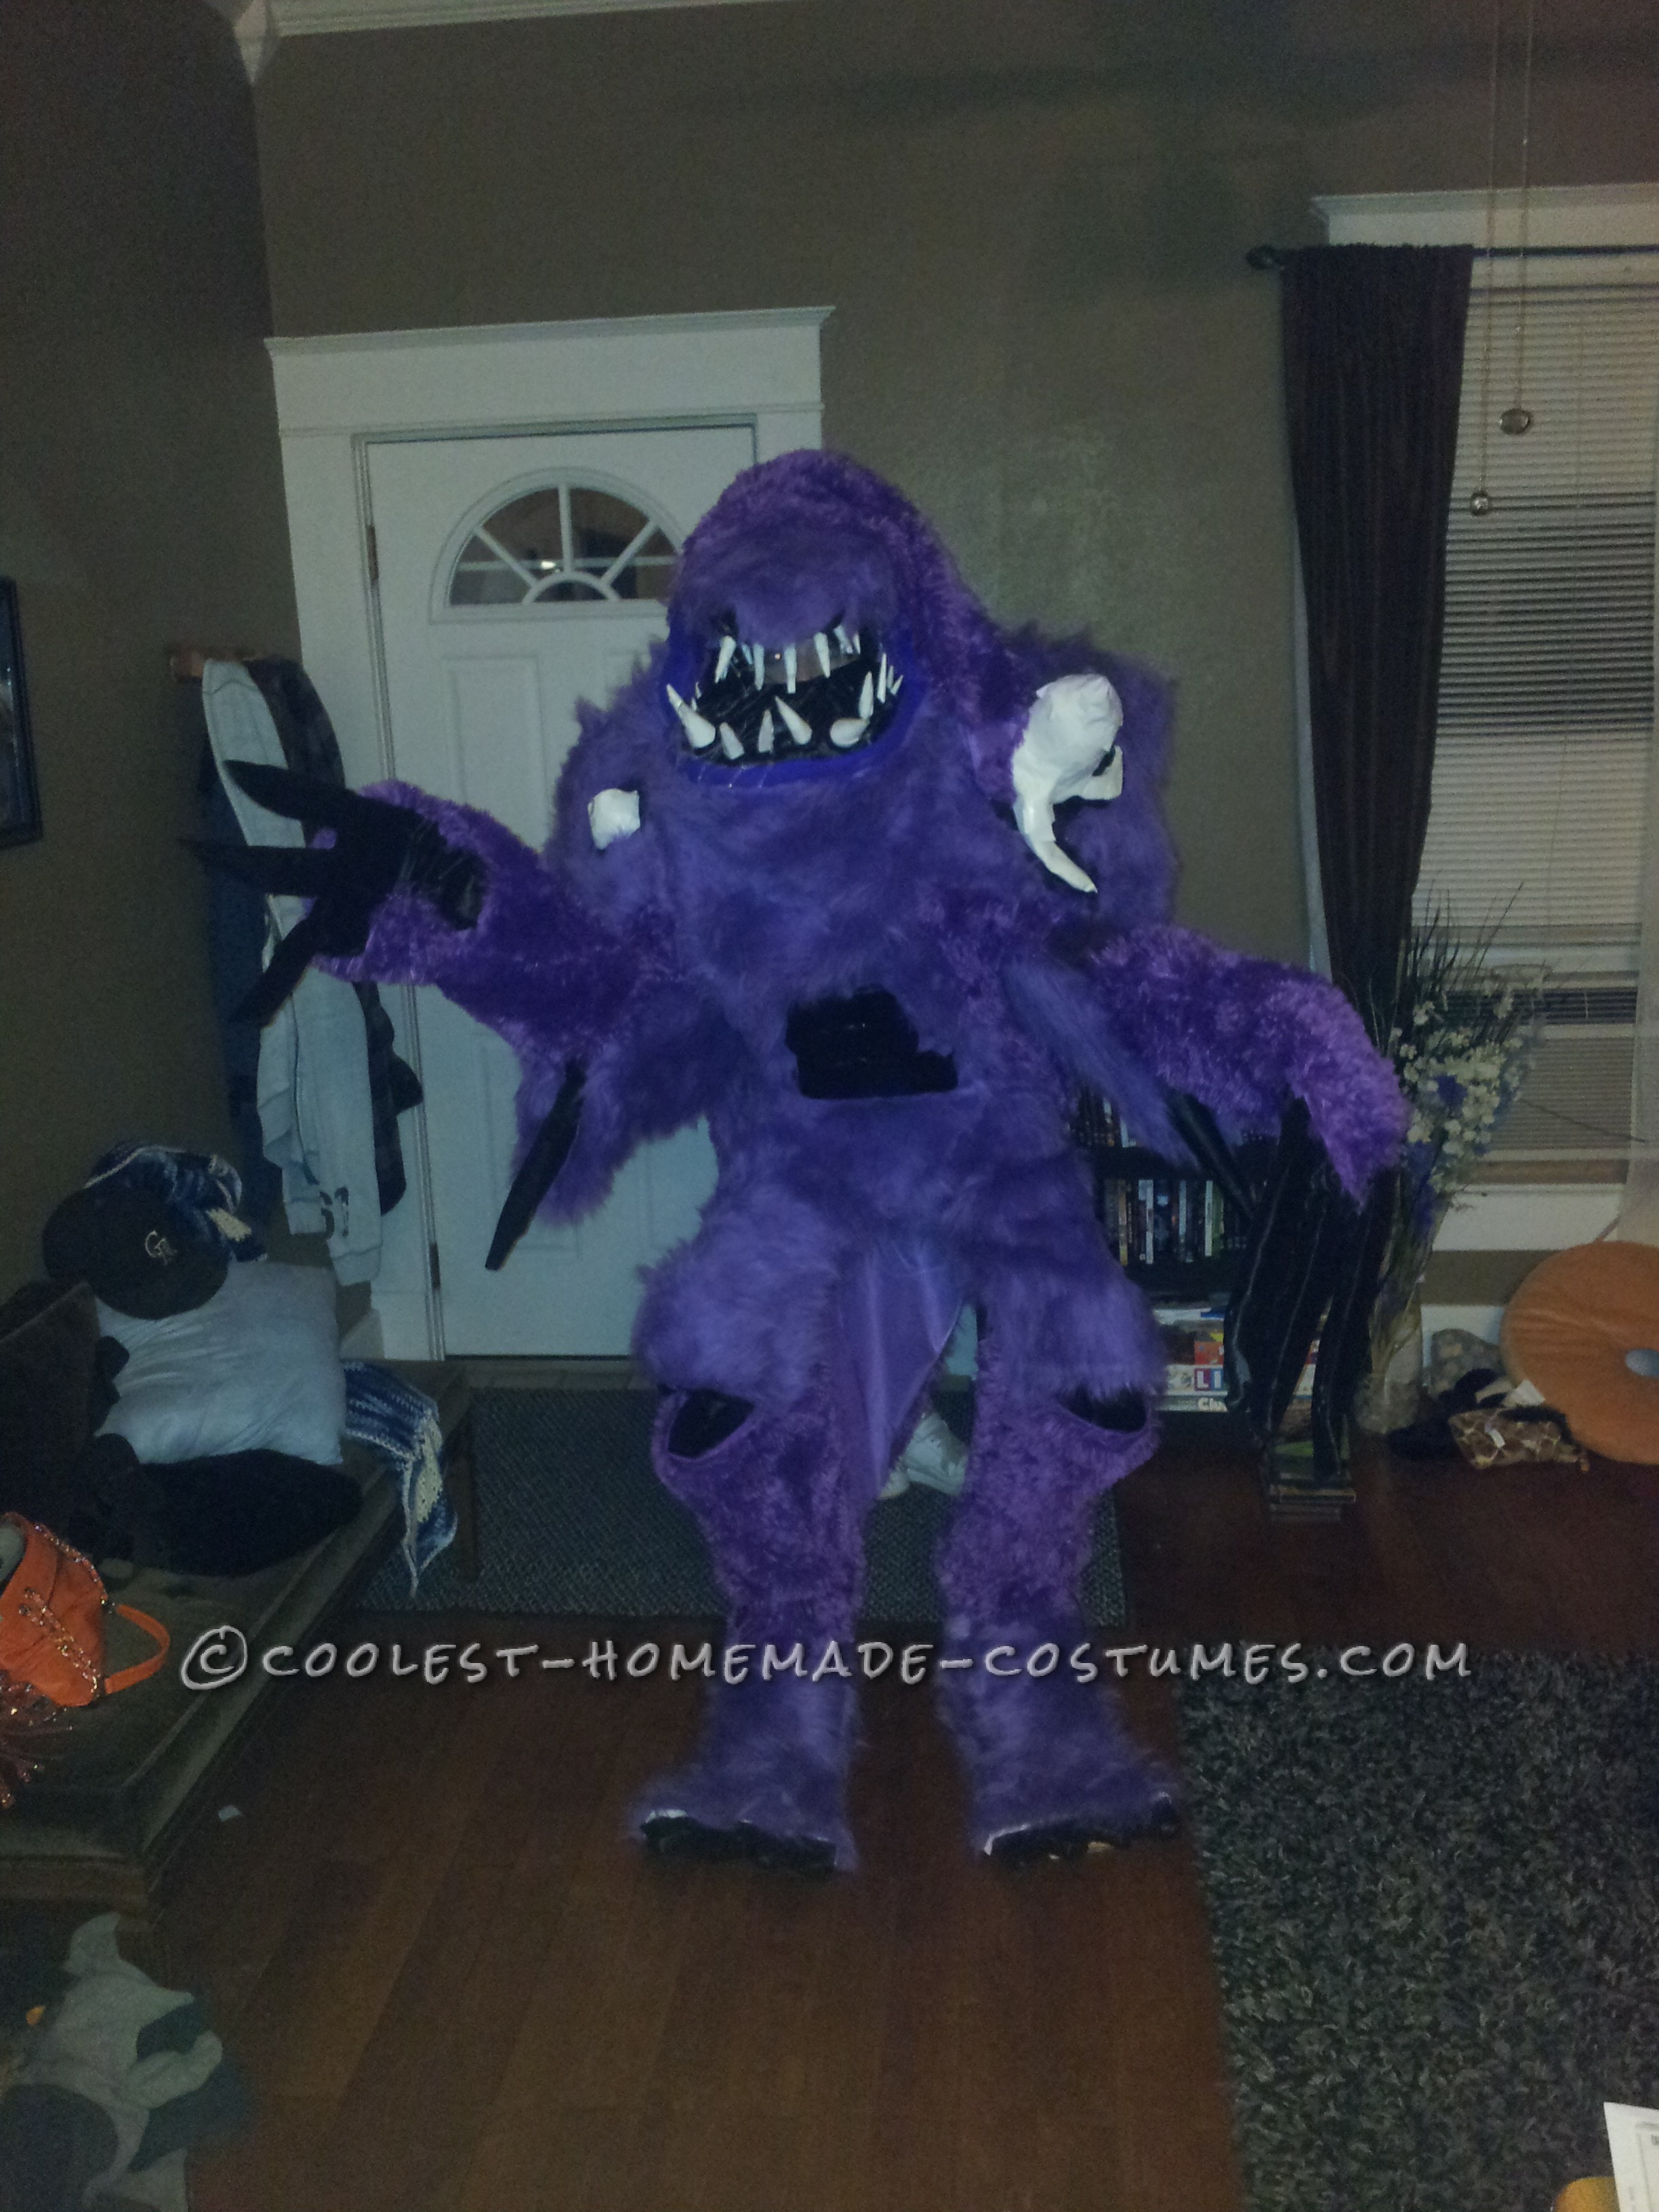 Awesome Homemade Purple People Eater Costume